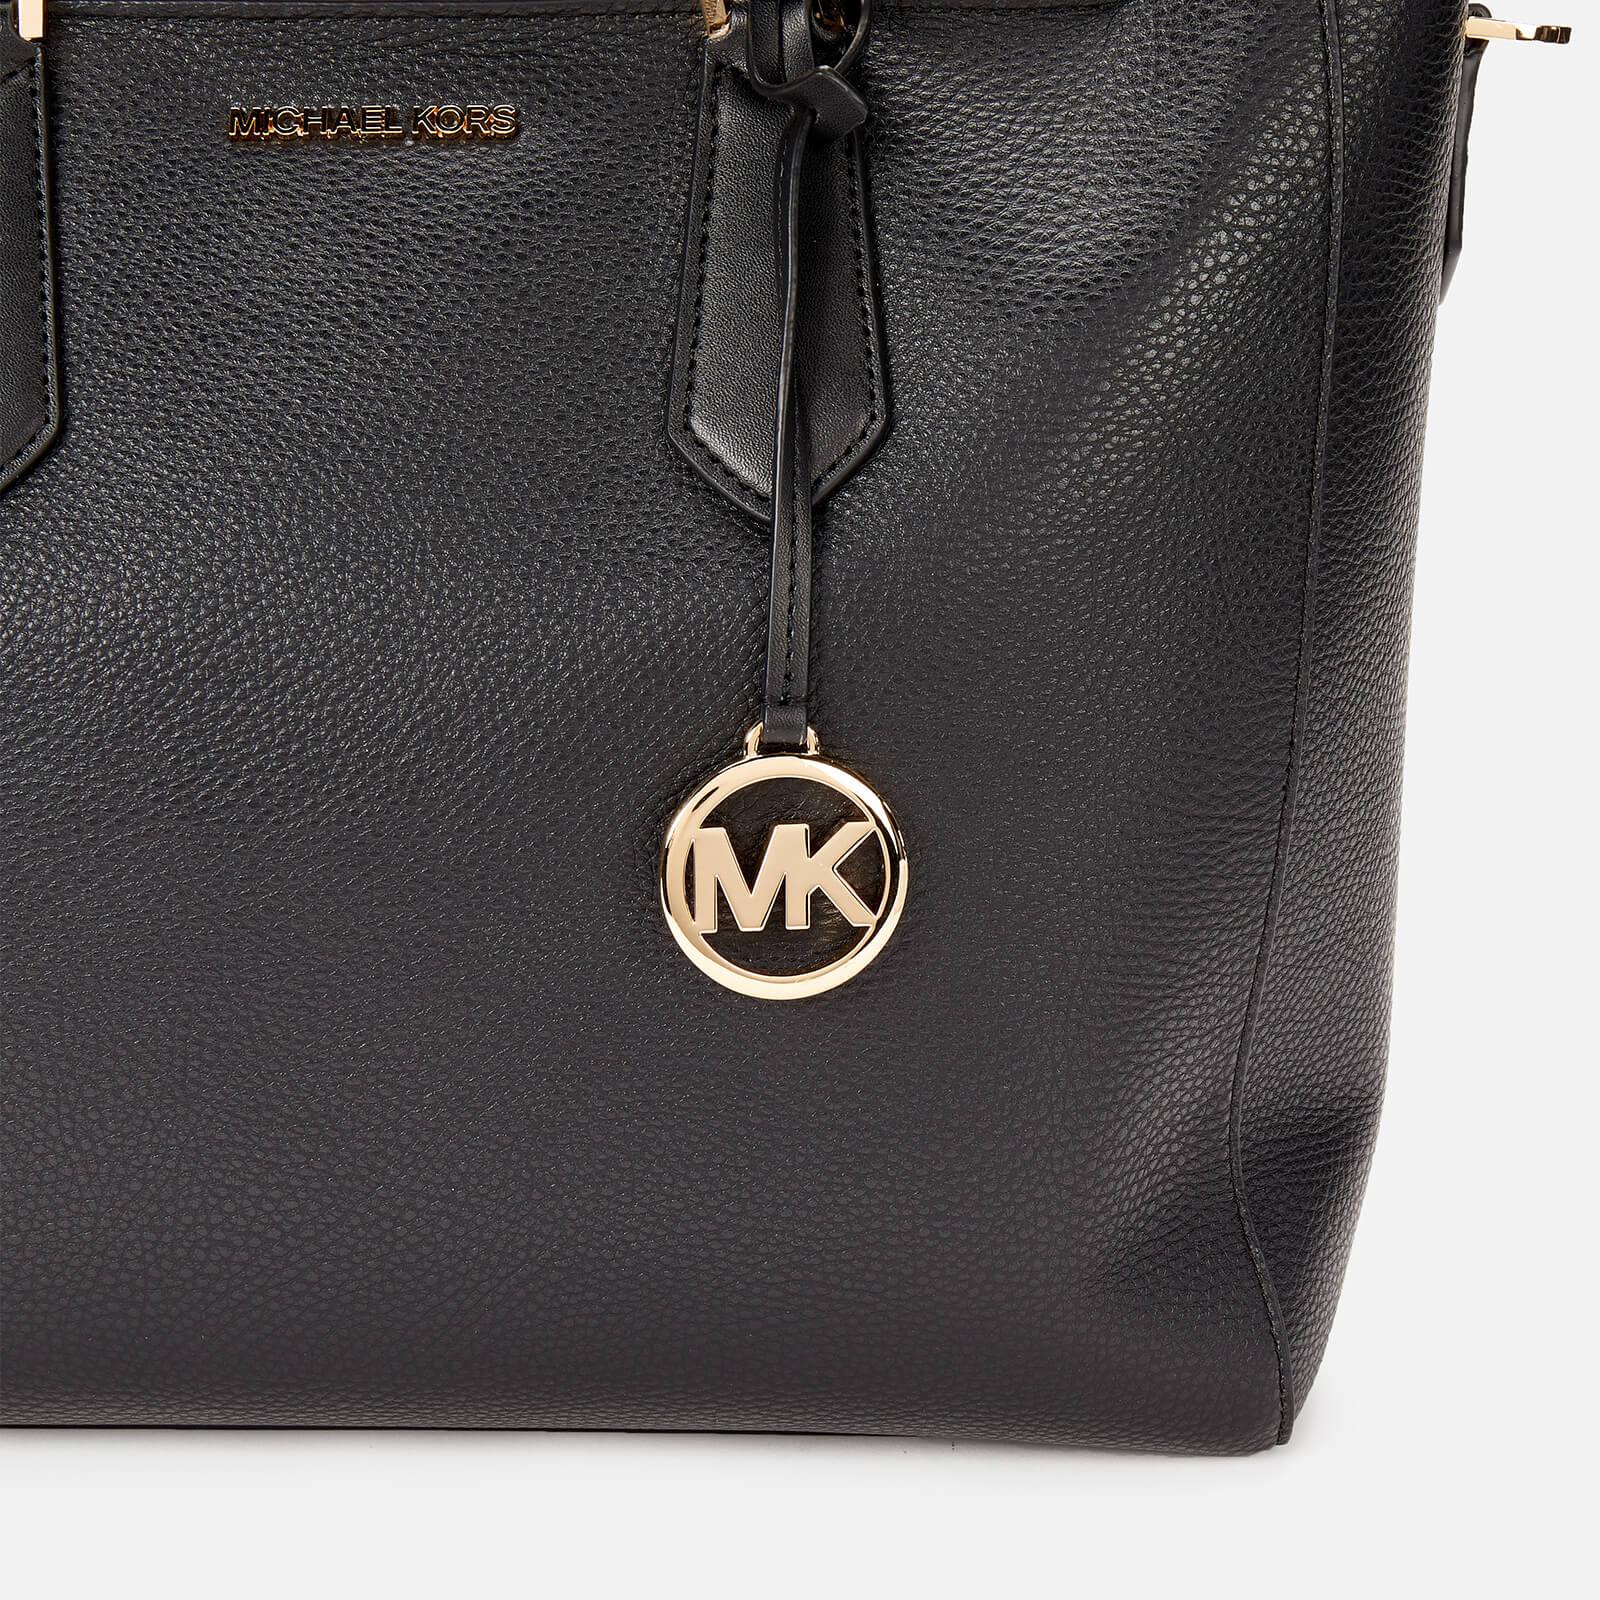 Michael+Kors+Black+Signature+Kimberly+3+in+1+Tote+Bag+Set+Pebbled+Leather  for sale online